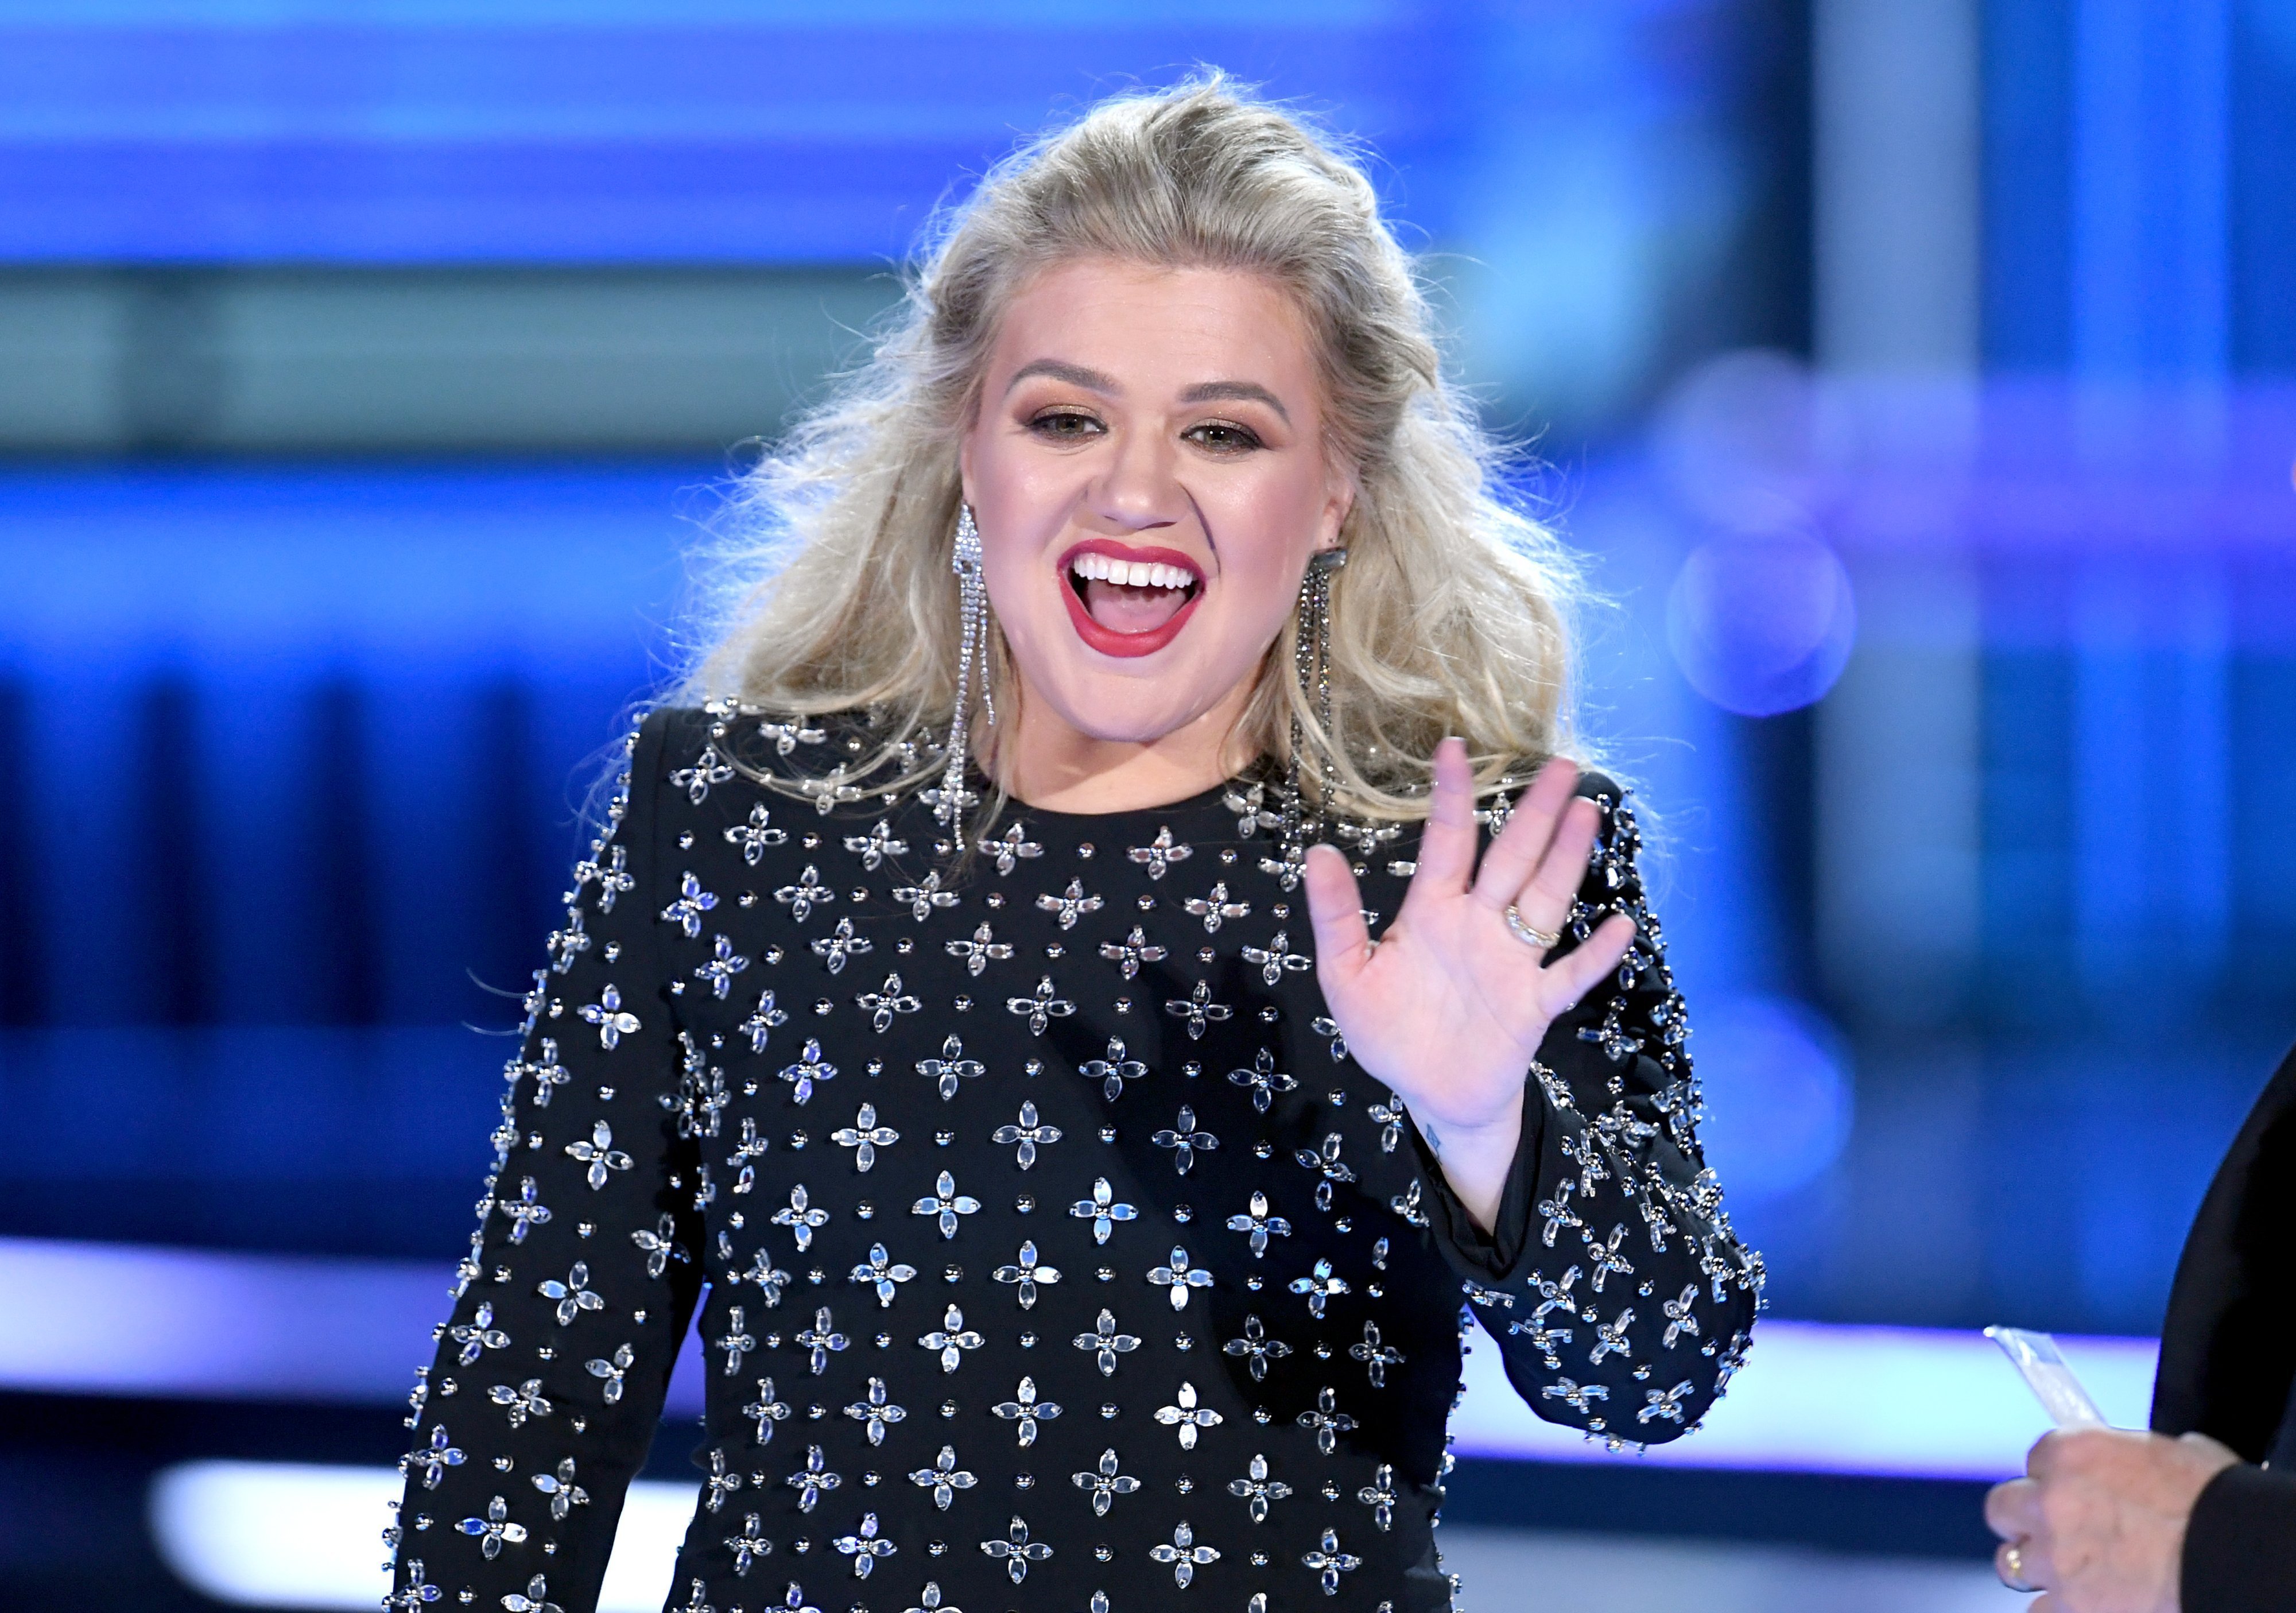 Kelly Clarkson speaks at the Billboard Music Awards in Las Vegas, Nevada on May 1, 2019 | Photo: Getty Images